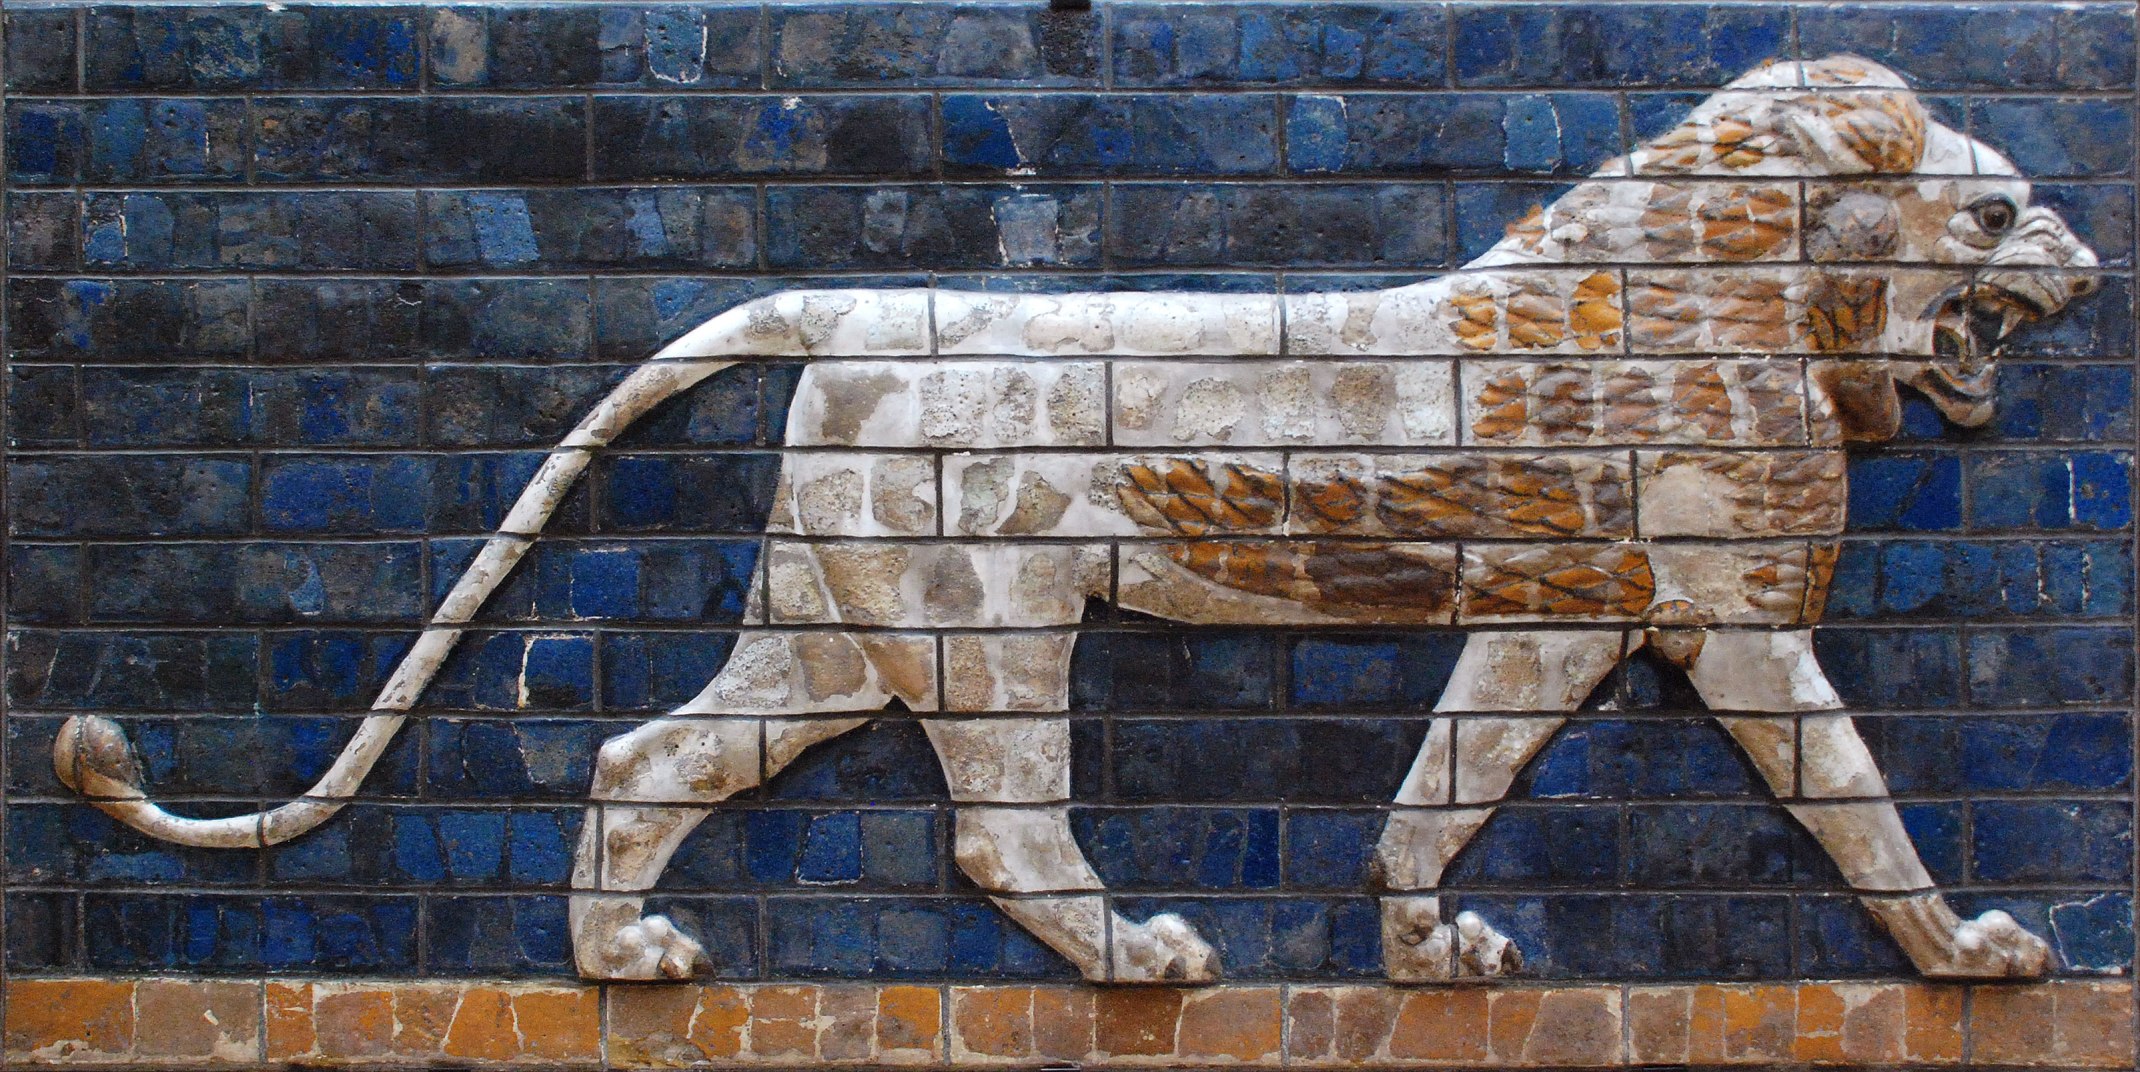 A lion from the Ishtar Gate into the city of Babylon. Constructed around 575 BC by King Nebuchadnezzar II